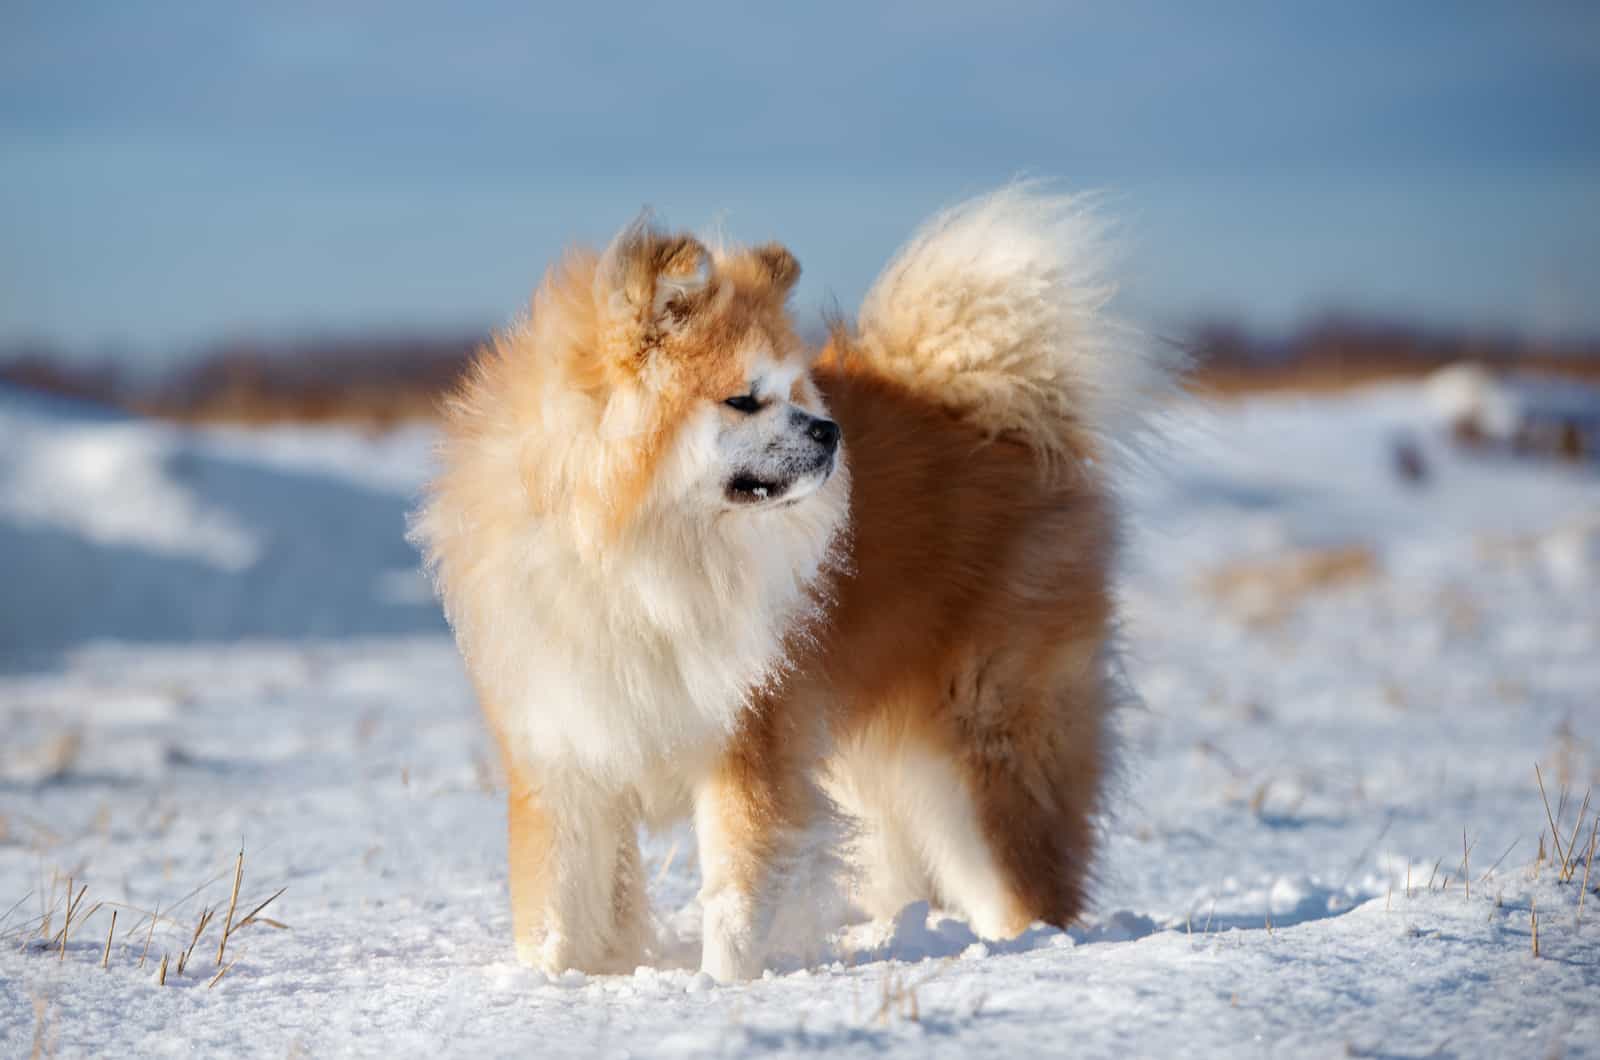 The Long Haired Akita: A Myth Or Outcasts? Let’s Find Out